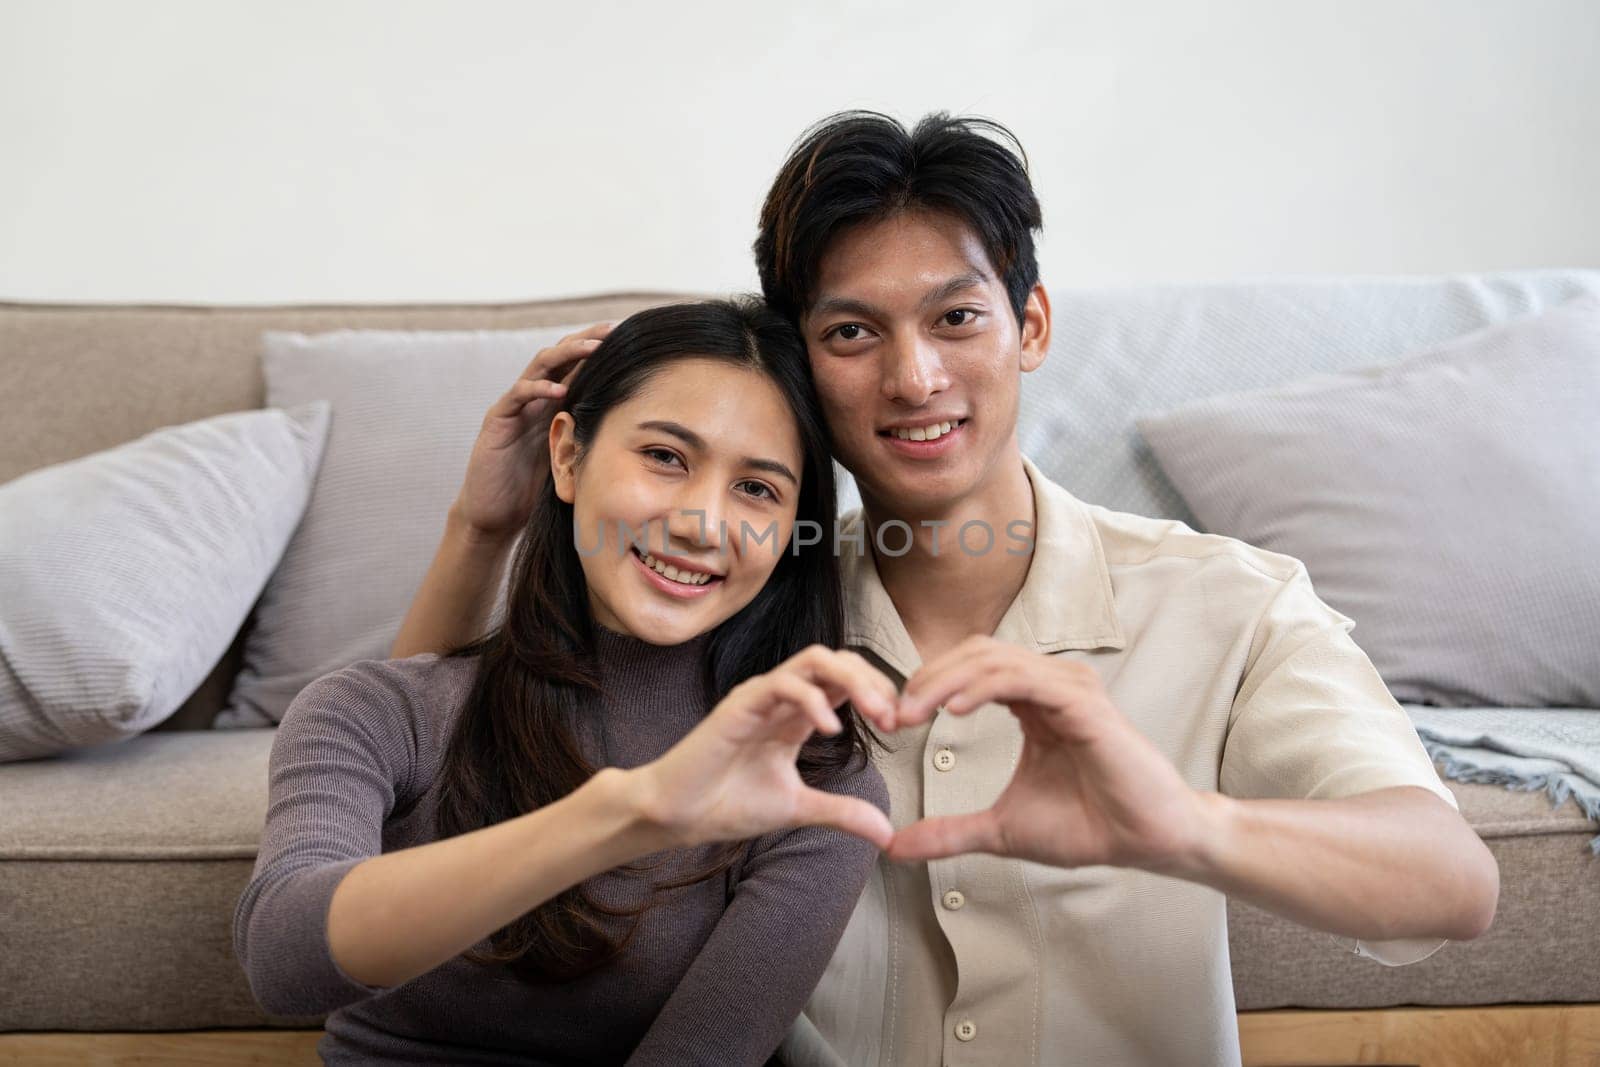 Lovely young couple asian is making heart sign with hands at home. Valentine day celebration.